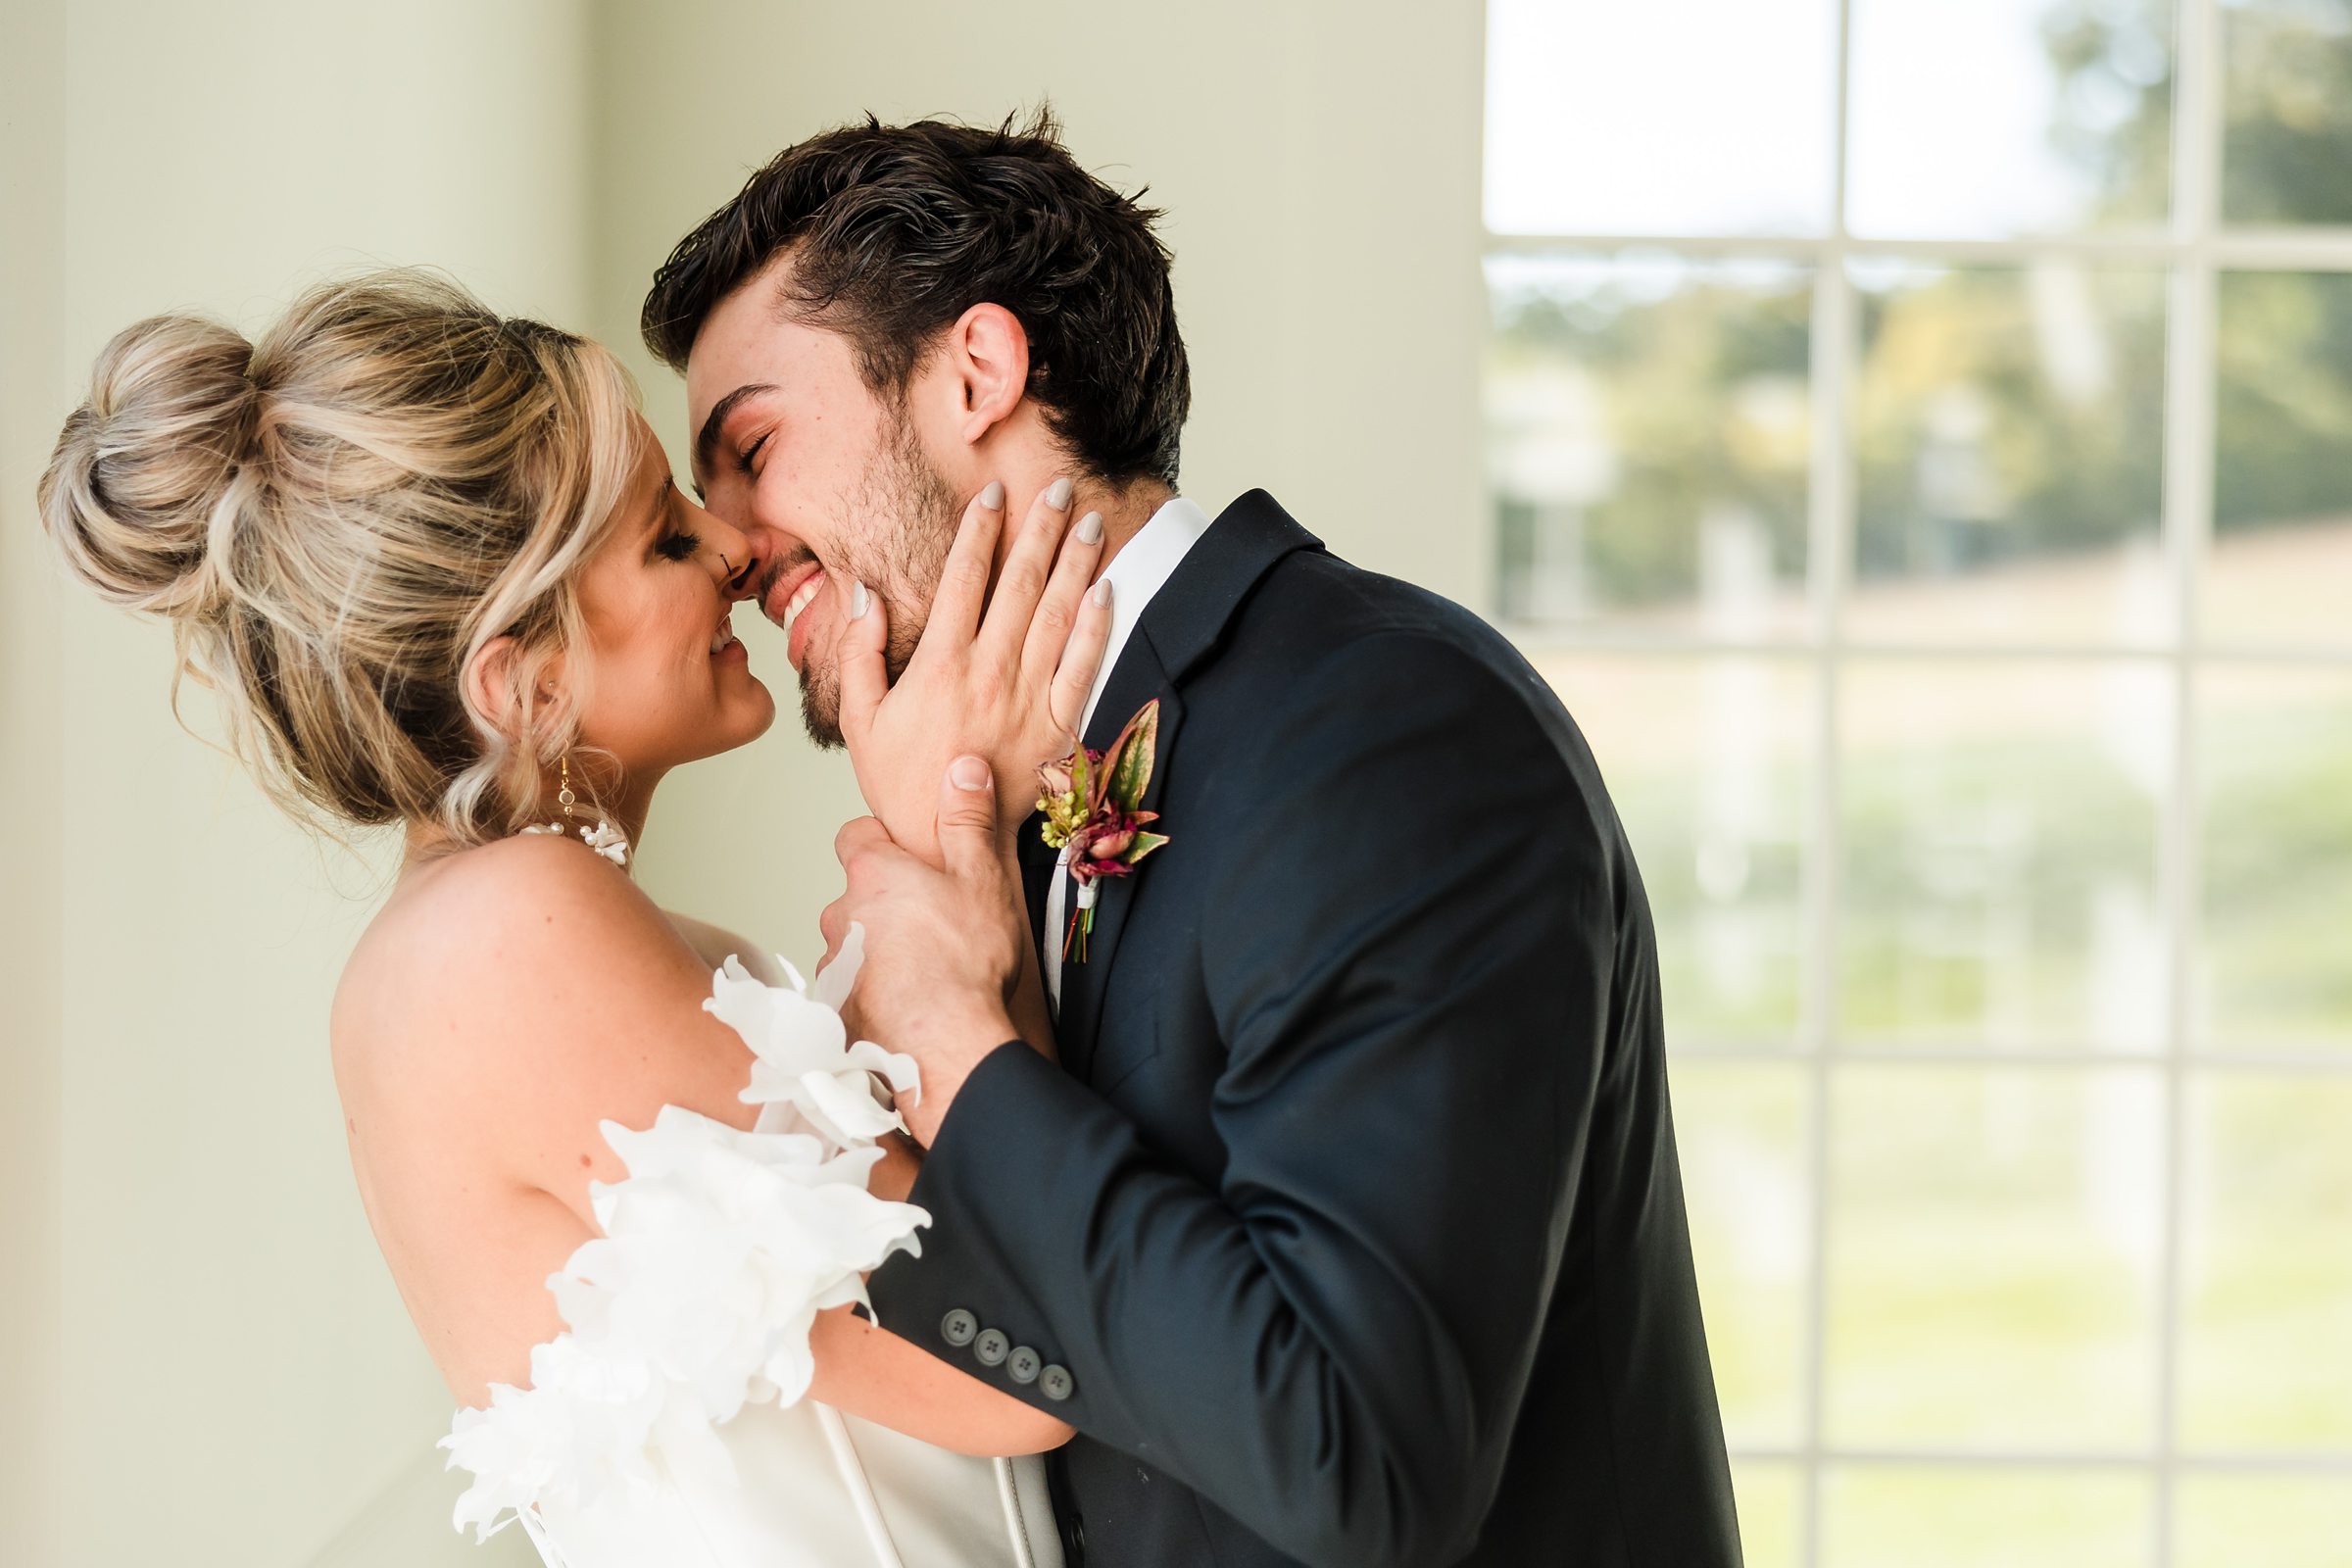 Bride and Groom Celebrate during a wedding at the Westwind Hills venue in Pacific, Missouri.